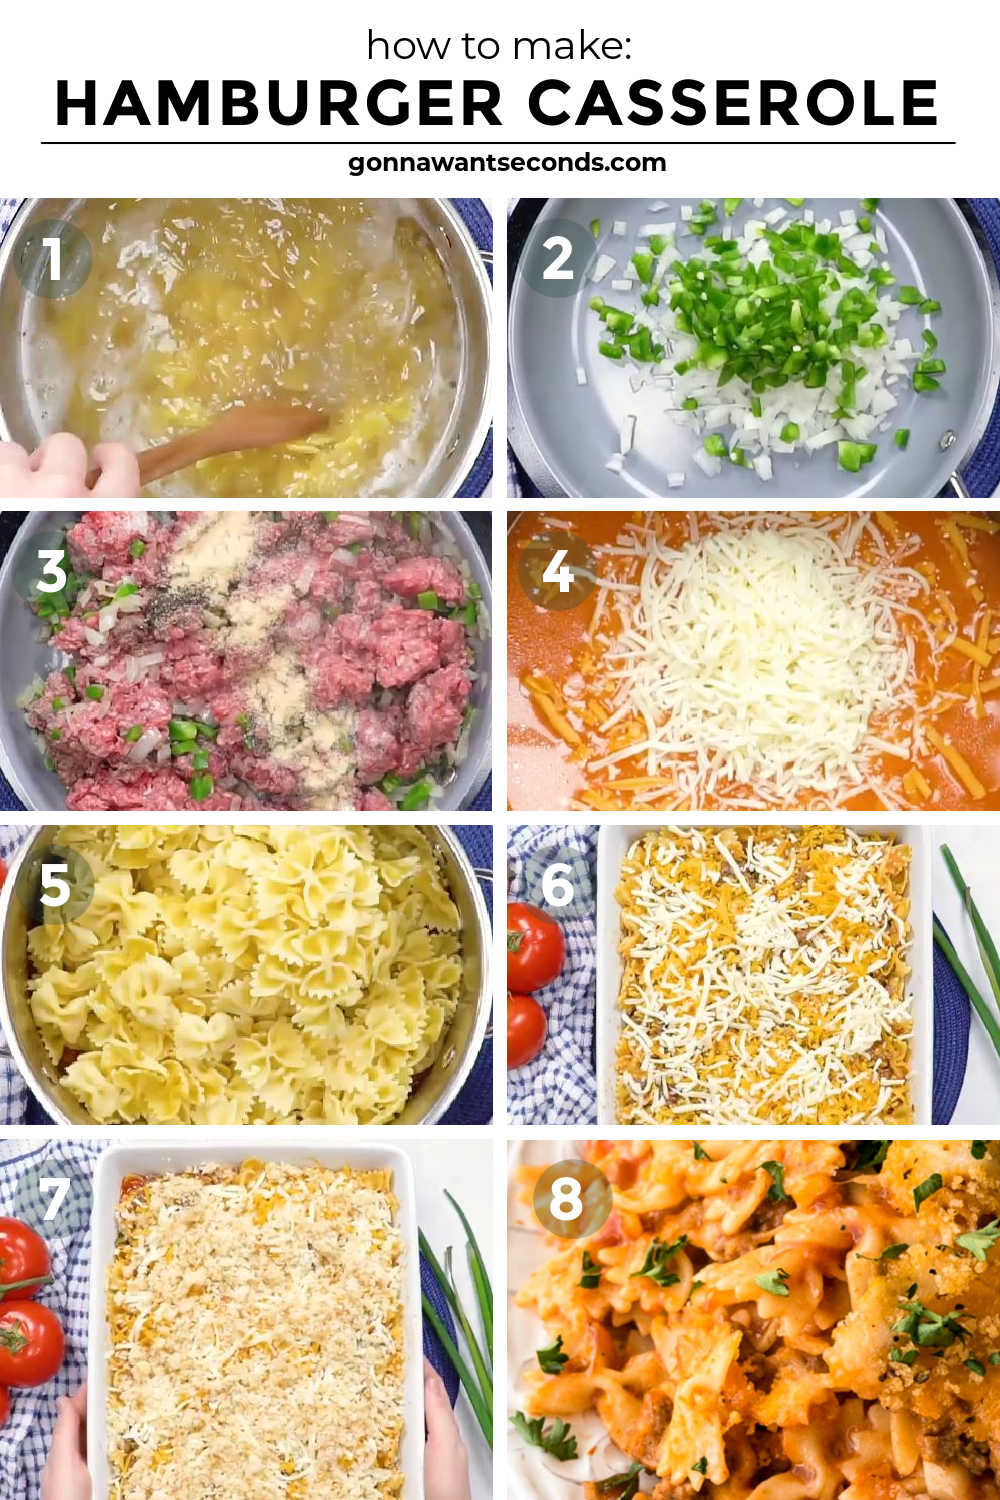 Step by step how to make hamburger casserole